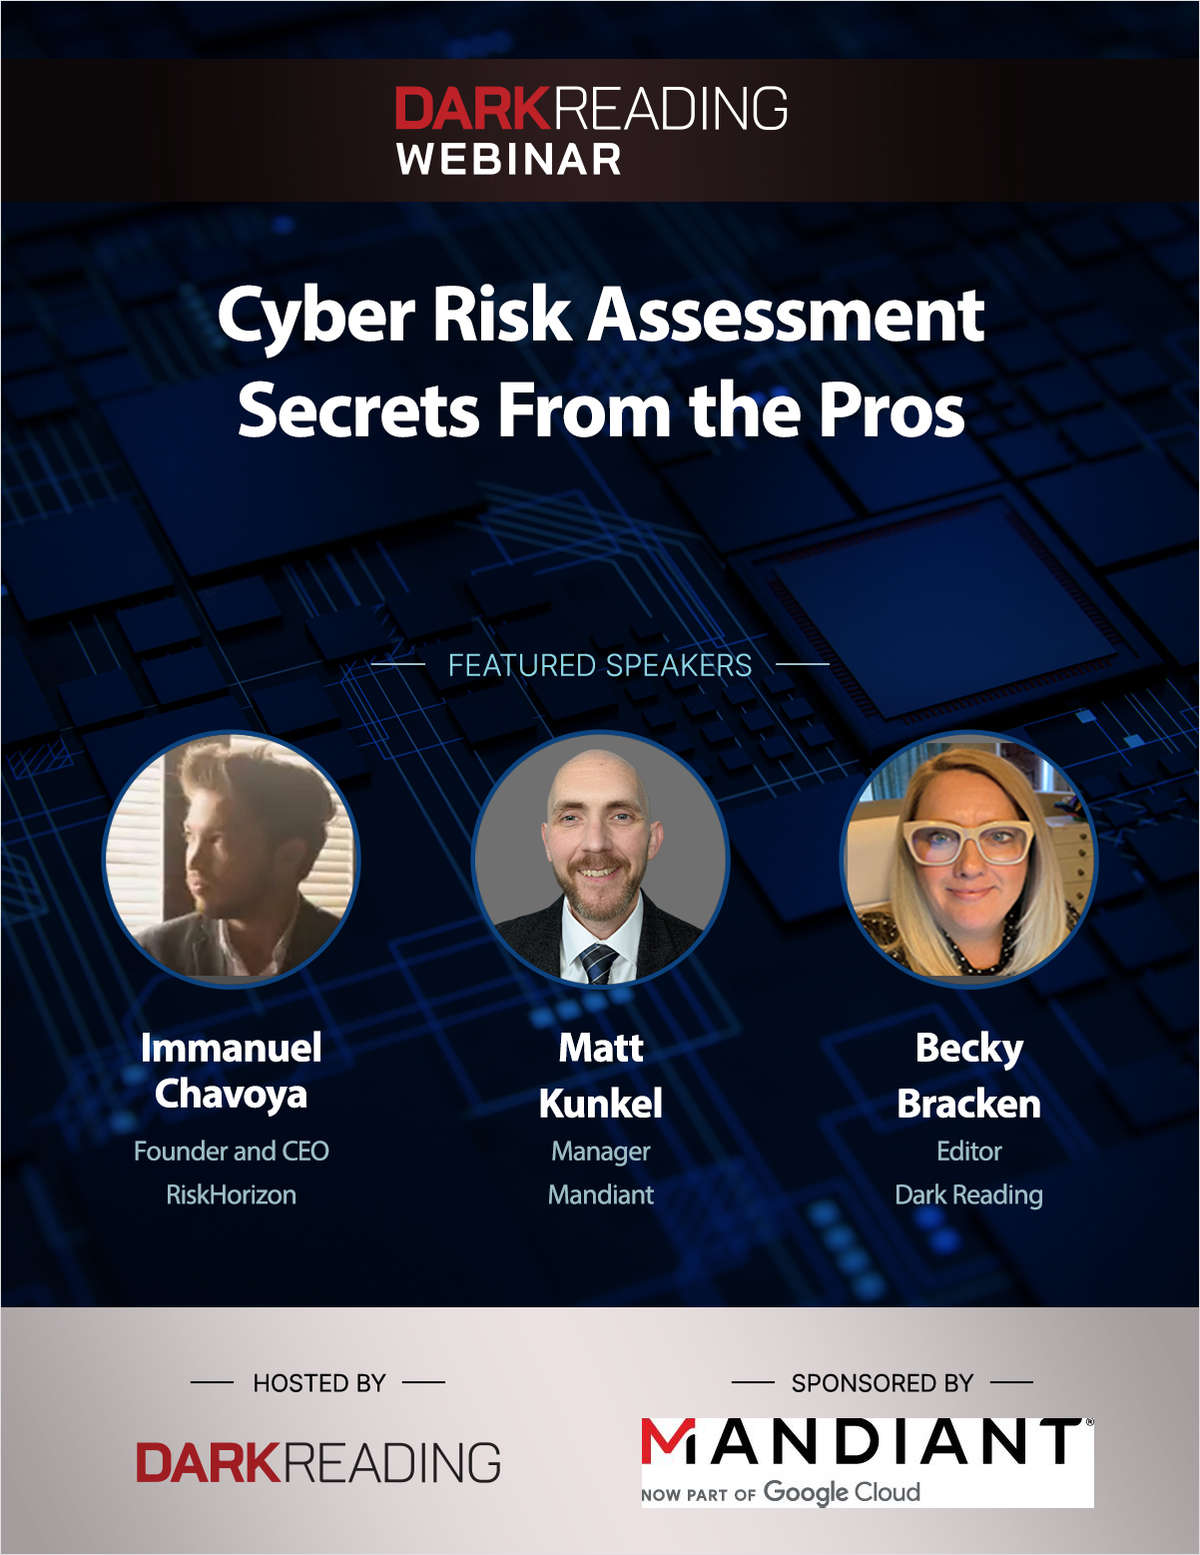 Cyber Risk Assessment Secrets From the Pros